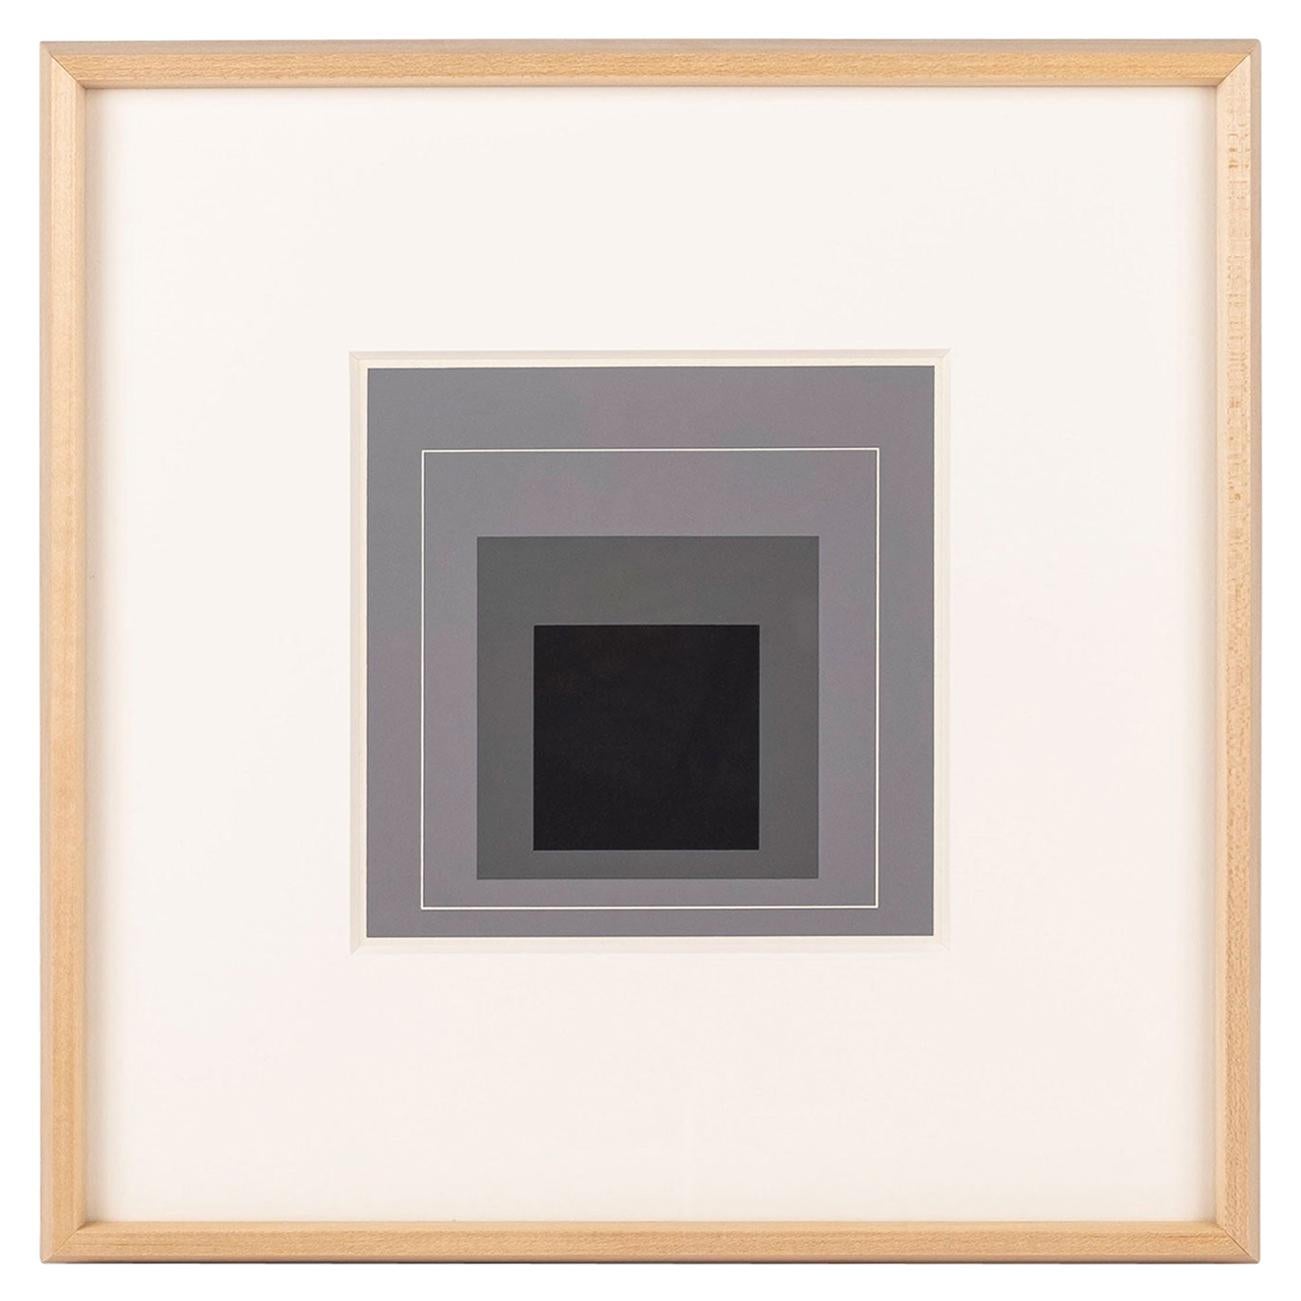 Homage to the Square Serigraph by Josef Albers